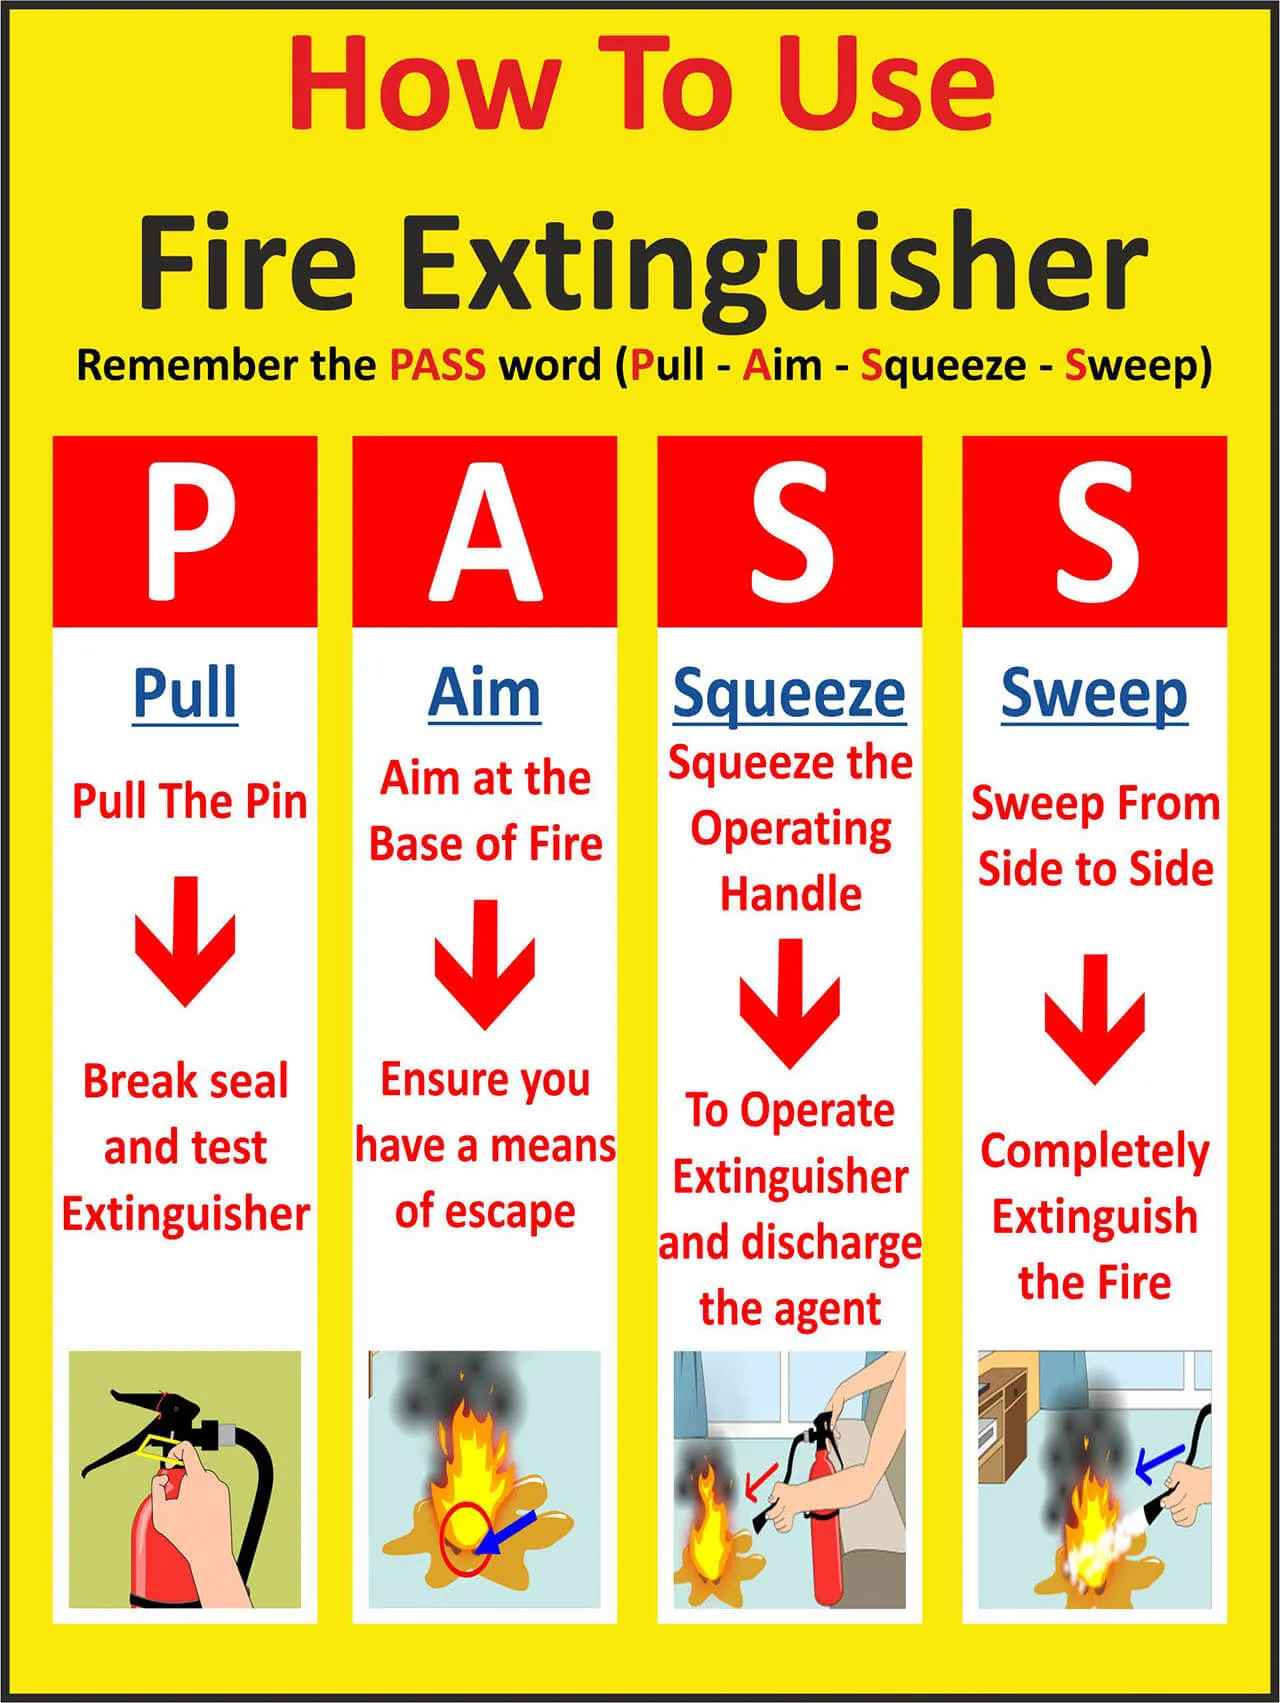 pull-aim-squeeze-sweep the pass technique for fire extinguisher usage